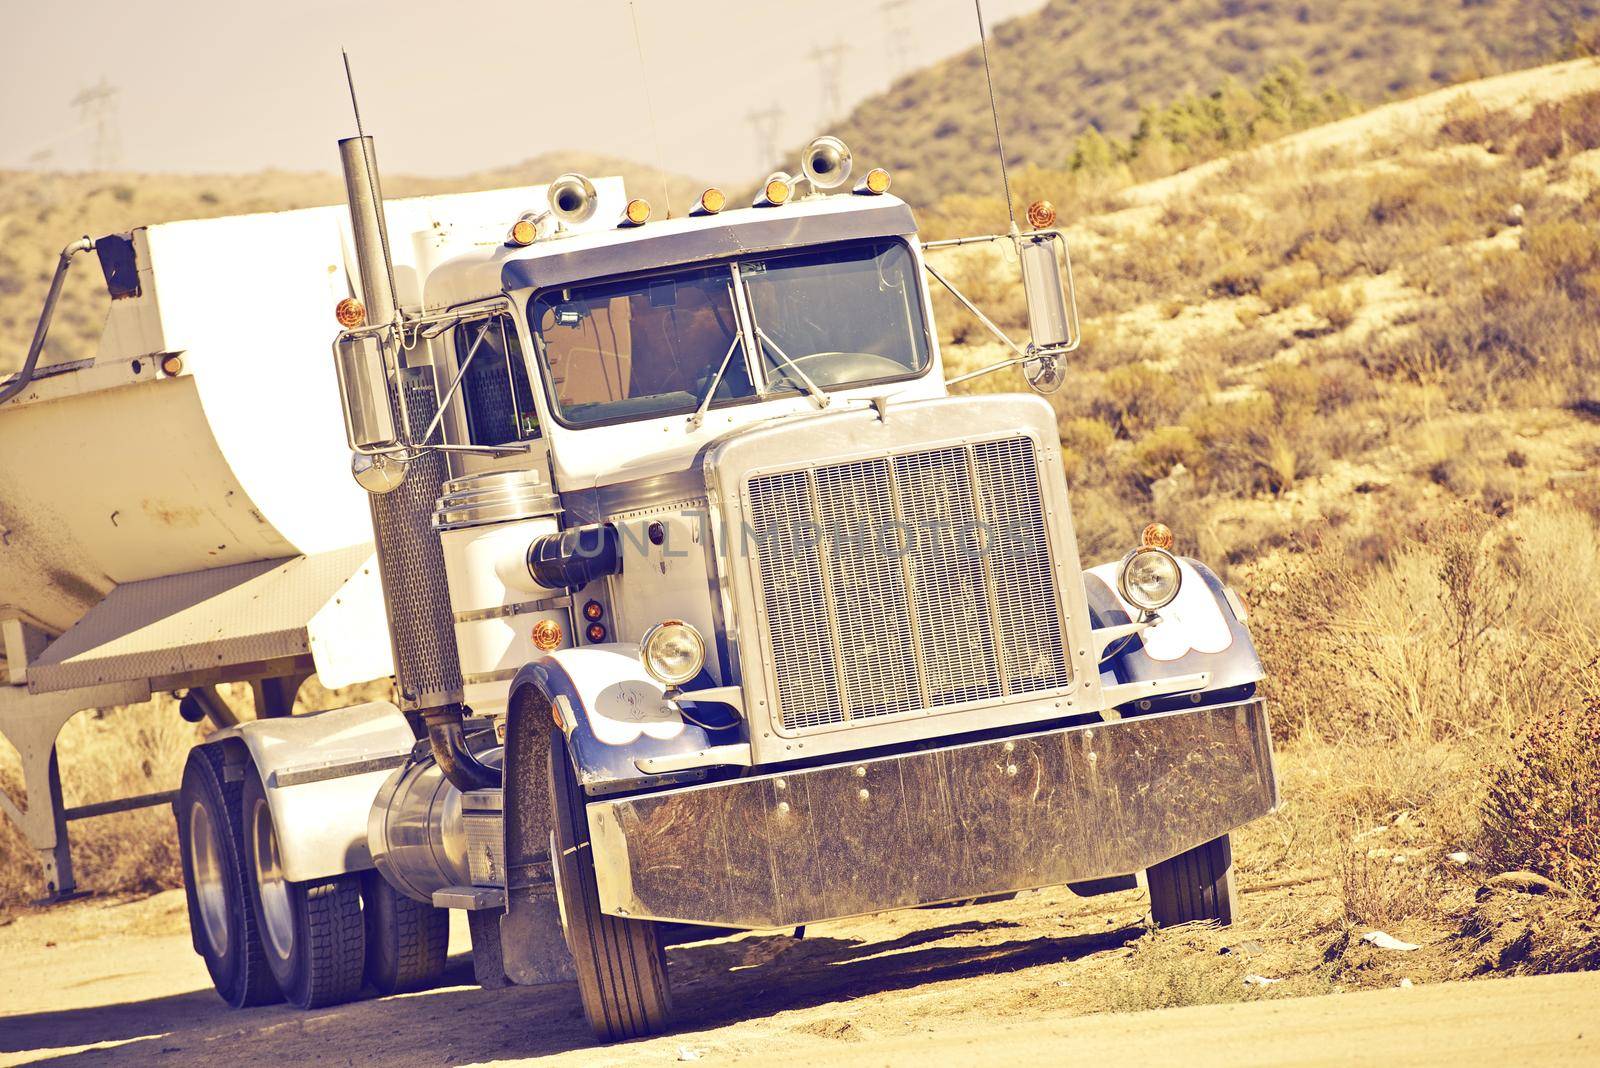 Aged American Truck in Southern California USA in Vintage Colors. Transportation and Logistics Theme. Transportation Photo Collection.